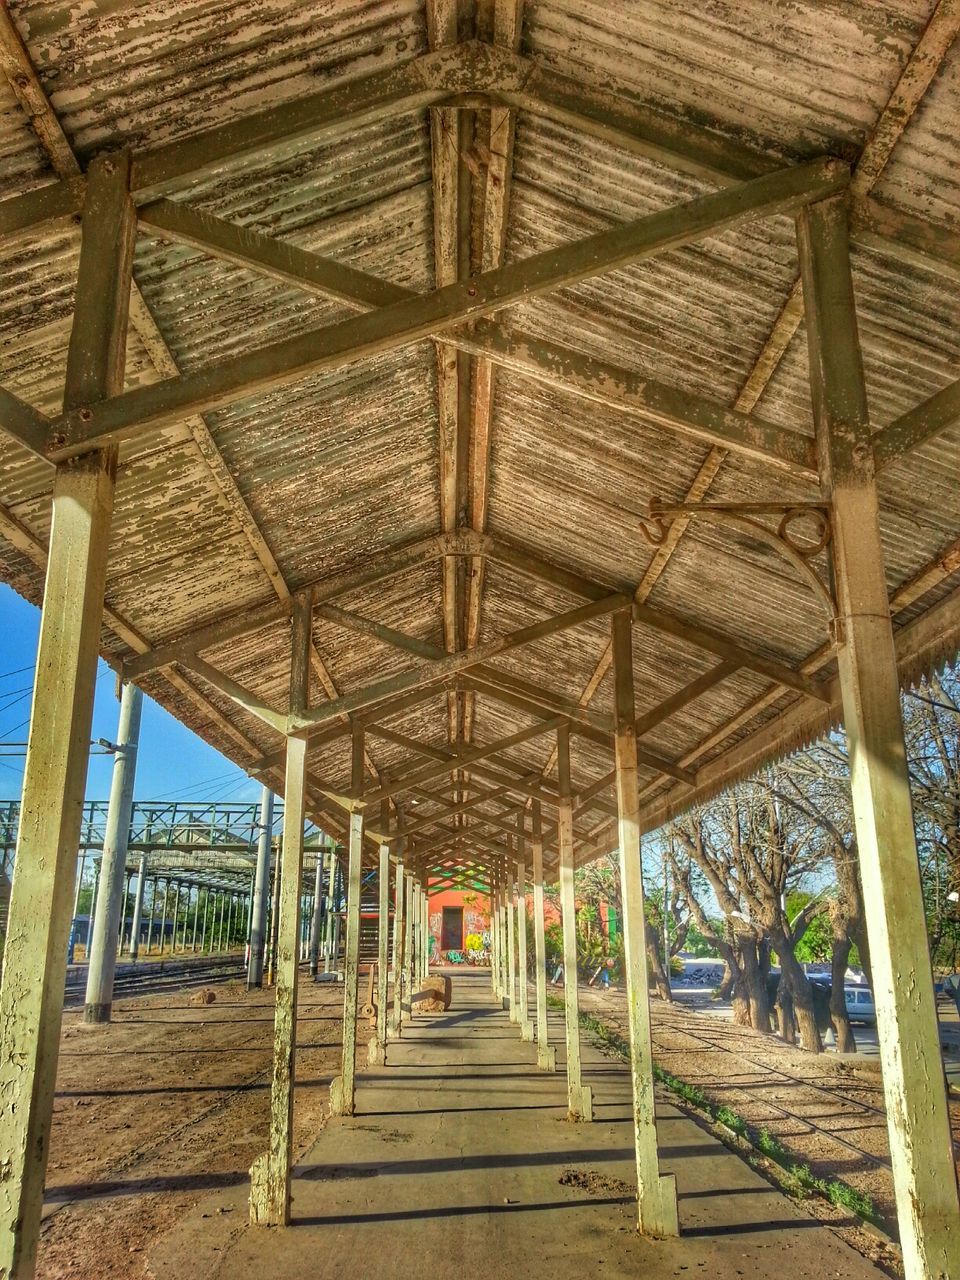 the way forward, built structure, architecture, ceiling, diminishing perspective, wood - material, railing, indoors, vanishing point, empty, architectural column, day, sunlight, walkway, sky, leading, tree, footbridge, long, roof